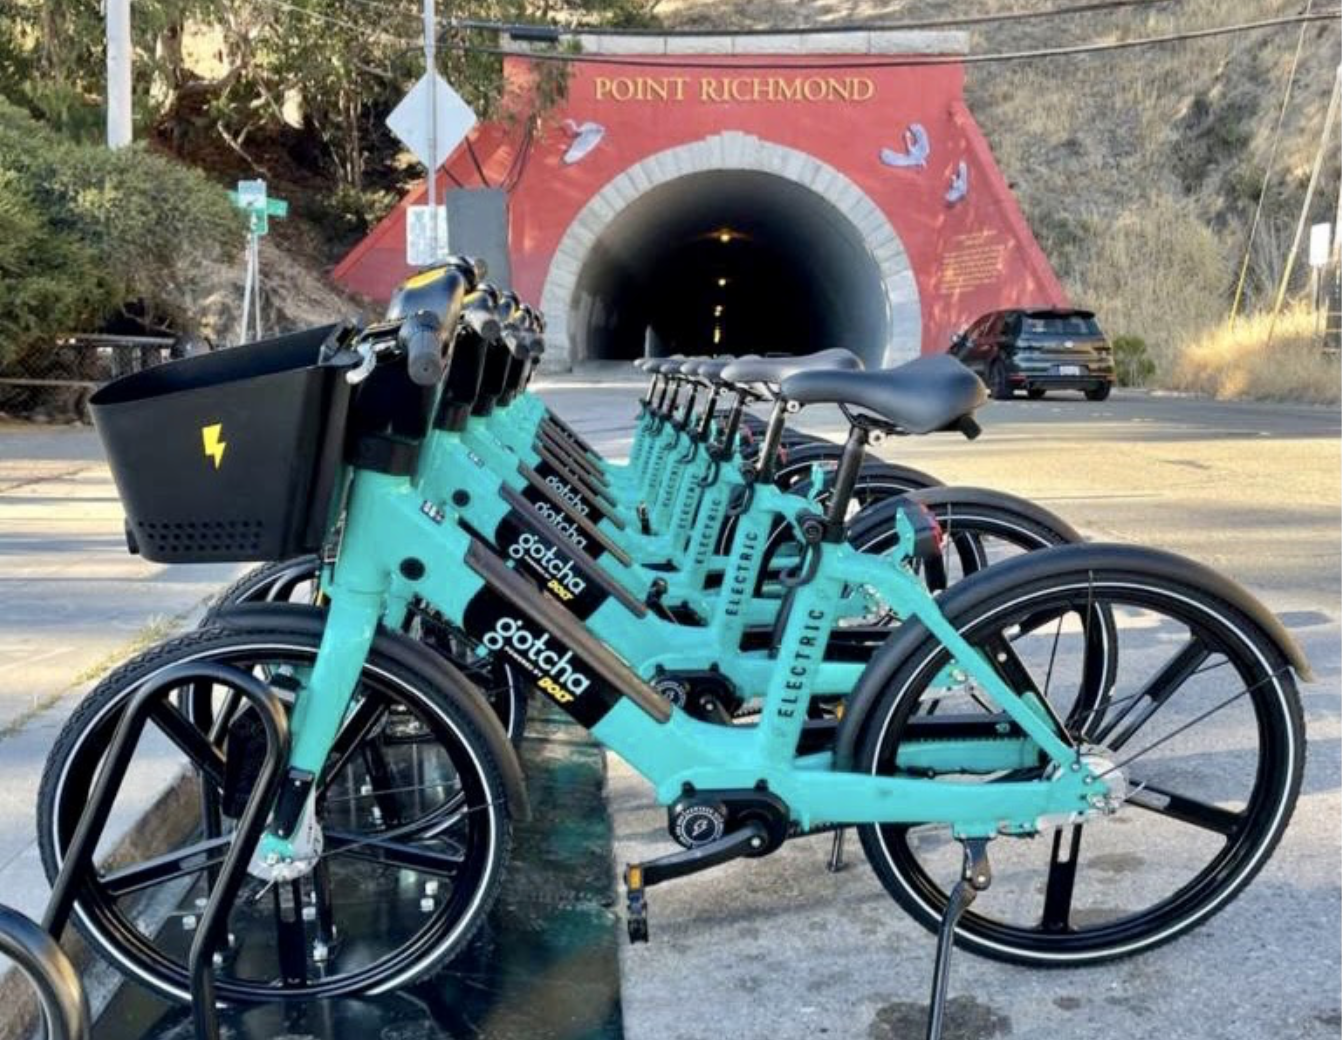 Teal-colored ebikes lined up in richmond ca